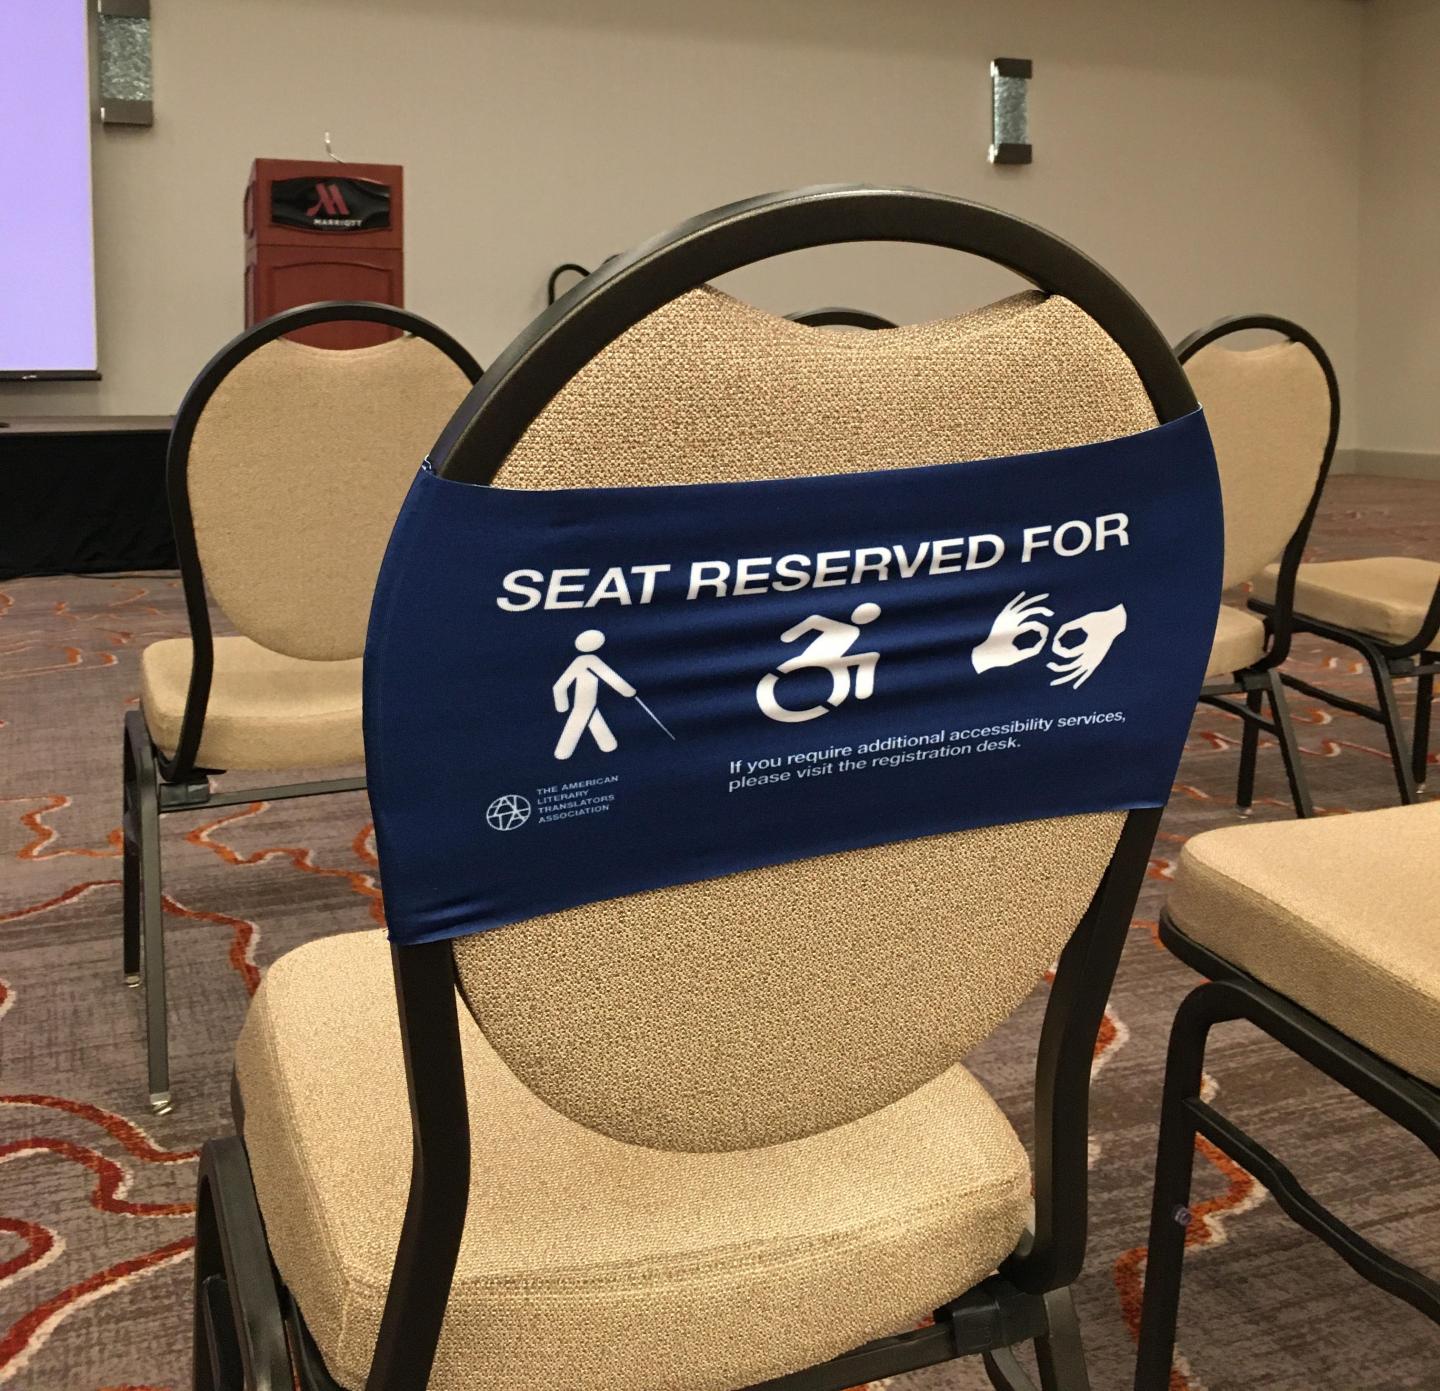 Image of a stretchy blue seat band with disability access symbols marking seating for those who need to be close to the front.